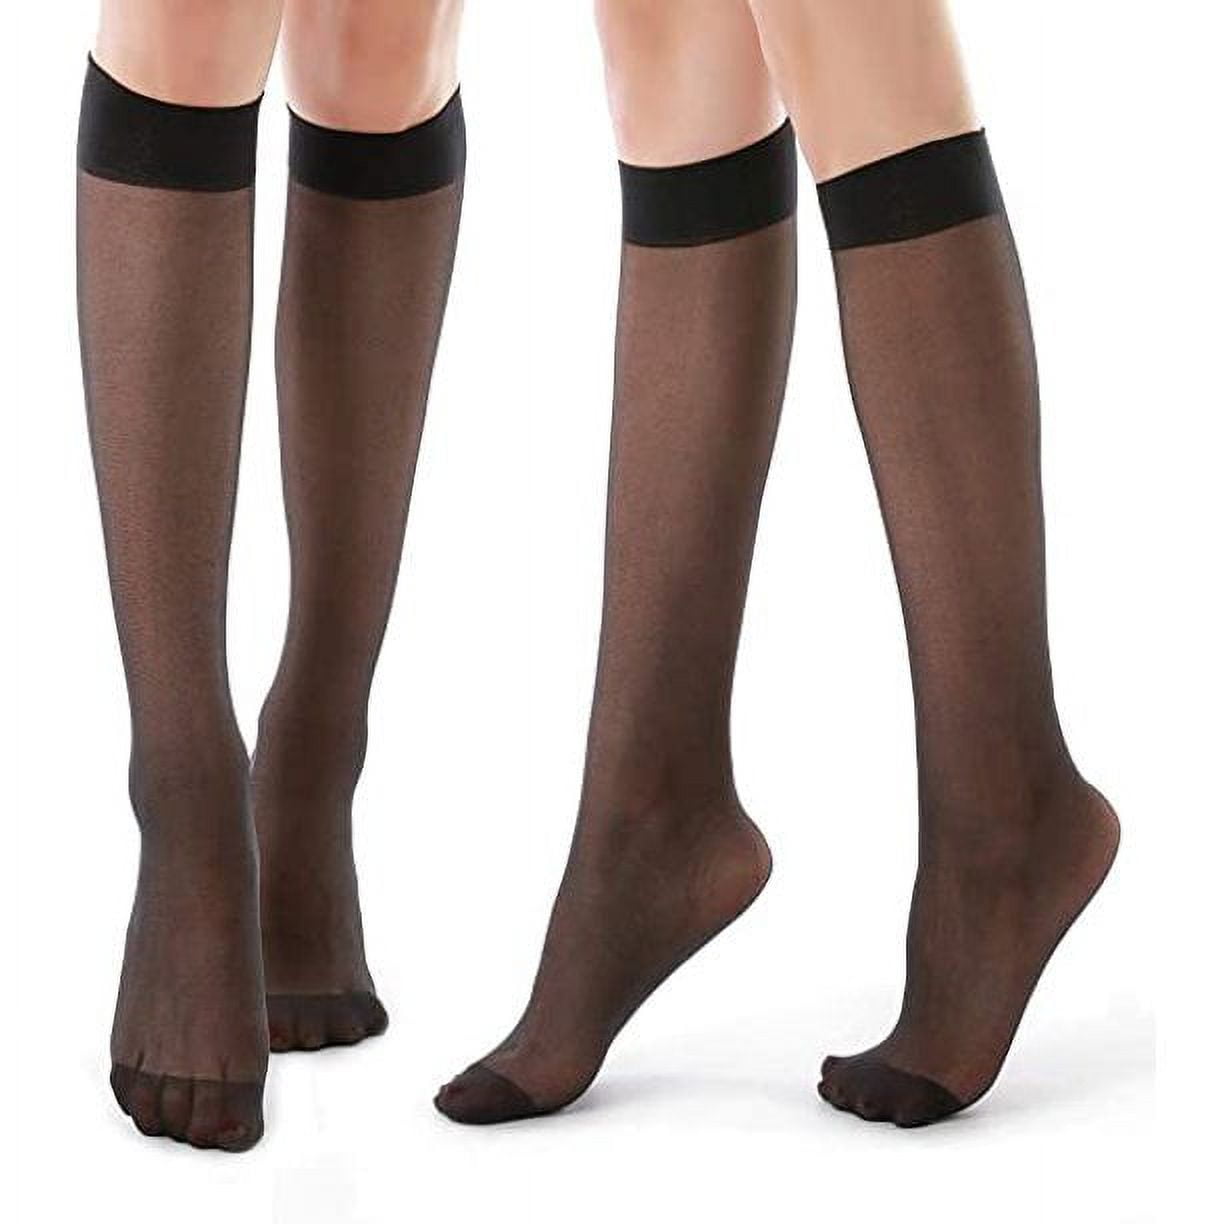 9 Pairs Knee High Pantyhose with Reinforced Toe - 20D Nylon